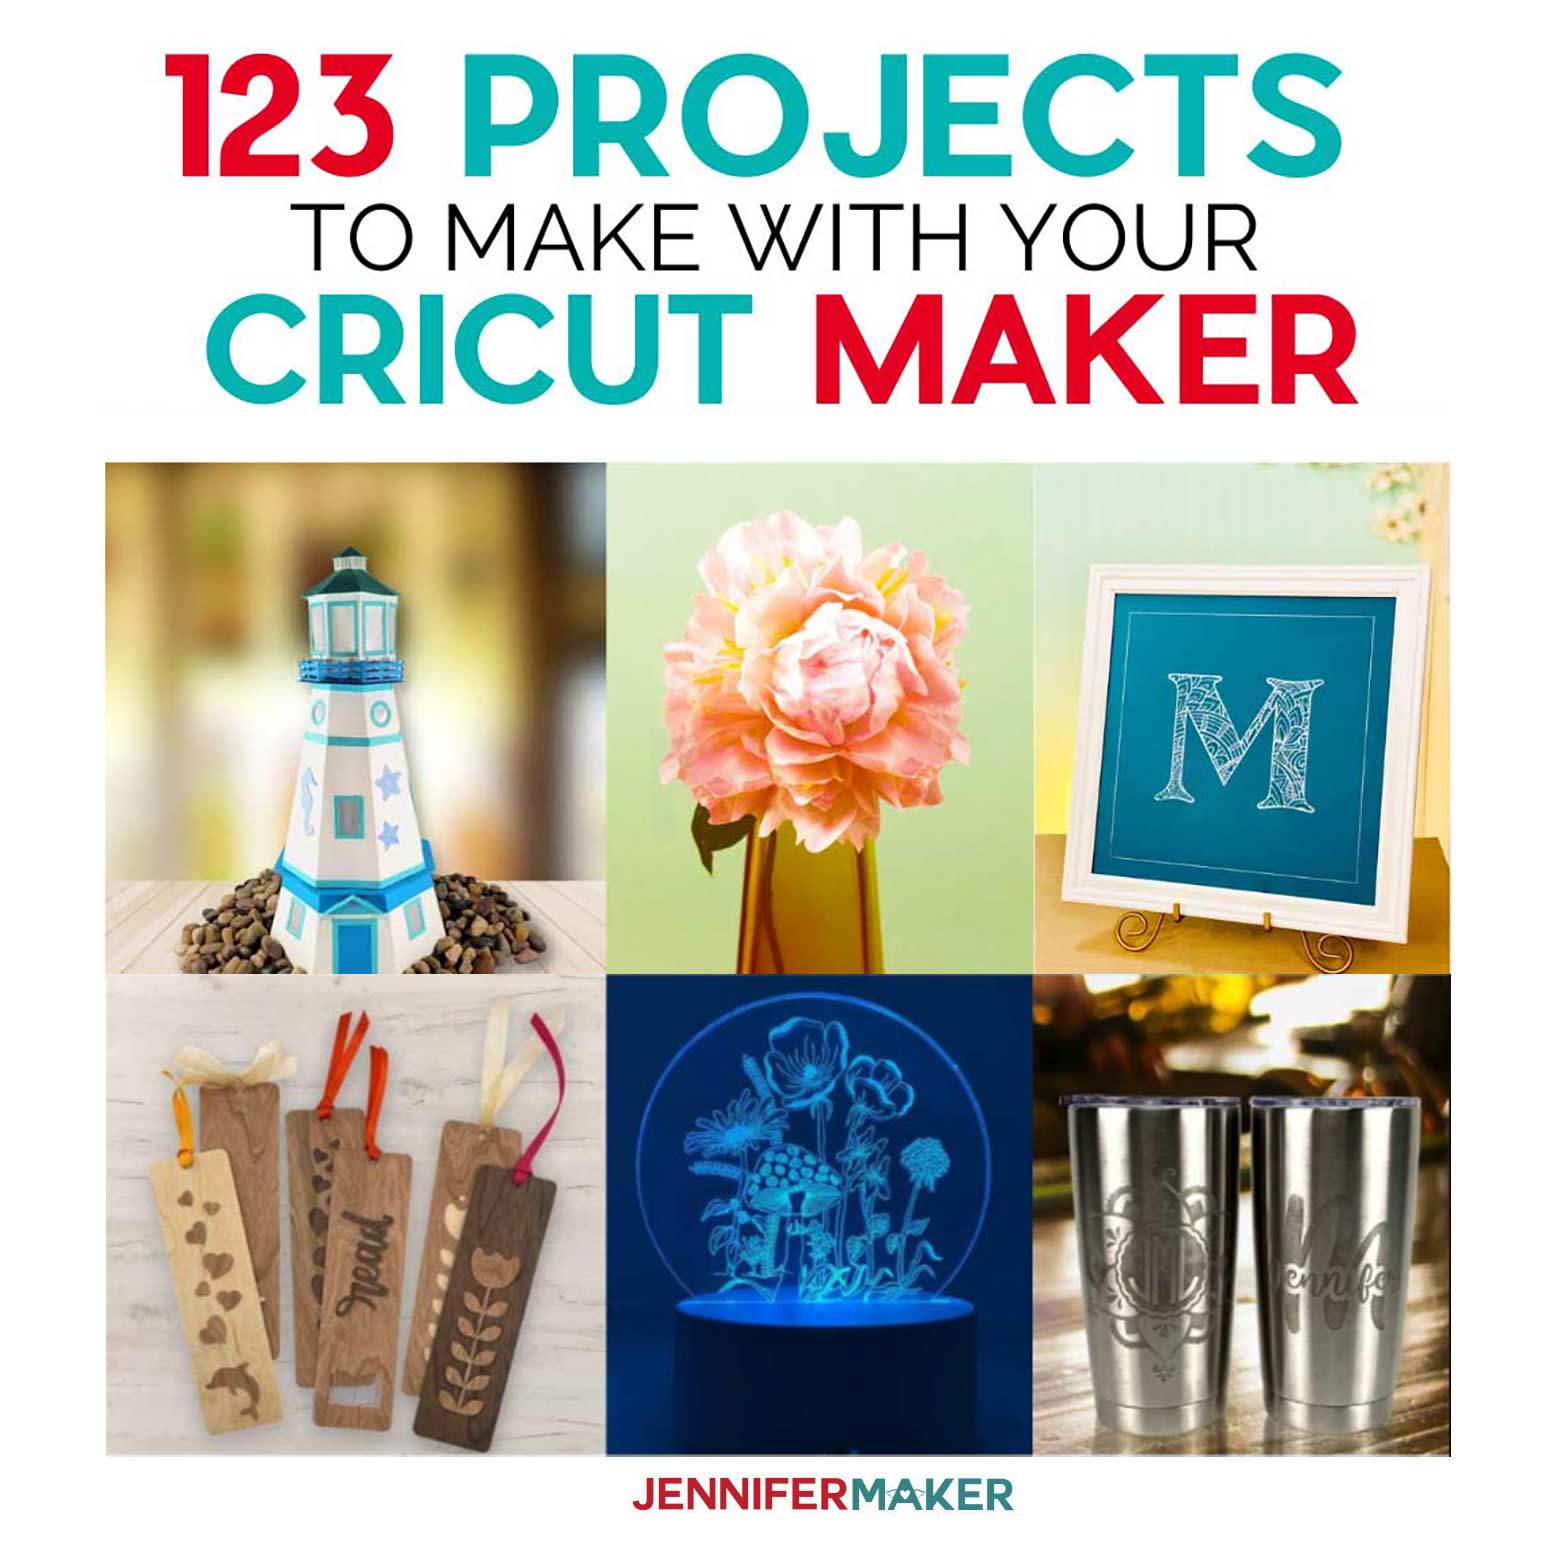 123 Projects You Can Make With A Cricut Maker